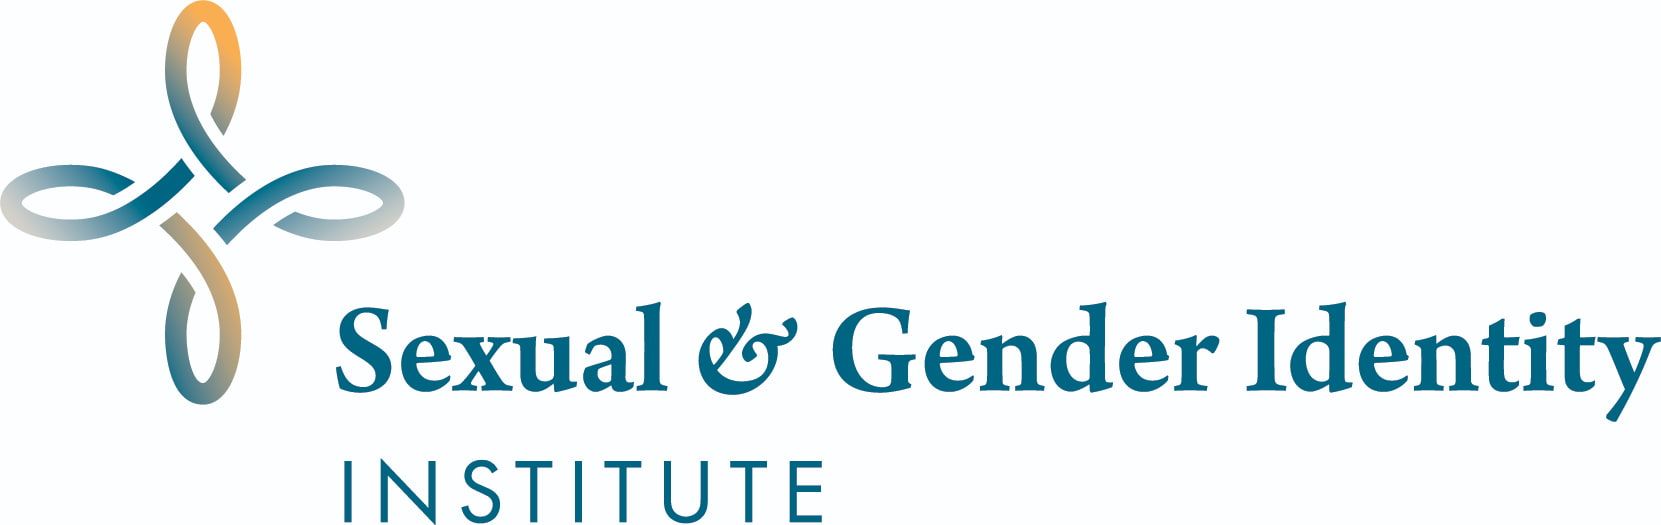 Sexual and Gender Identity Institute logo